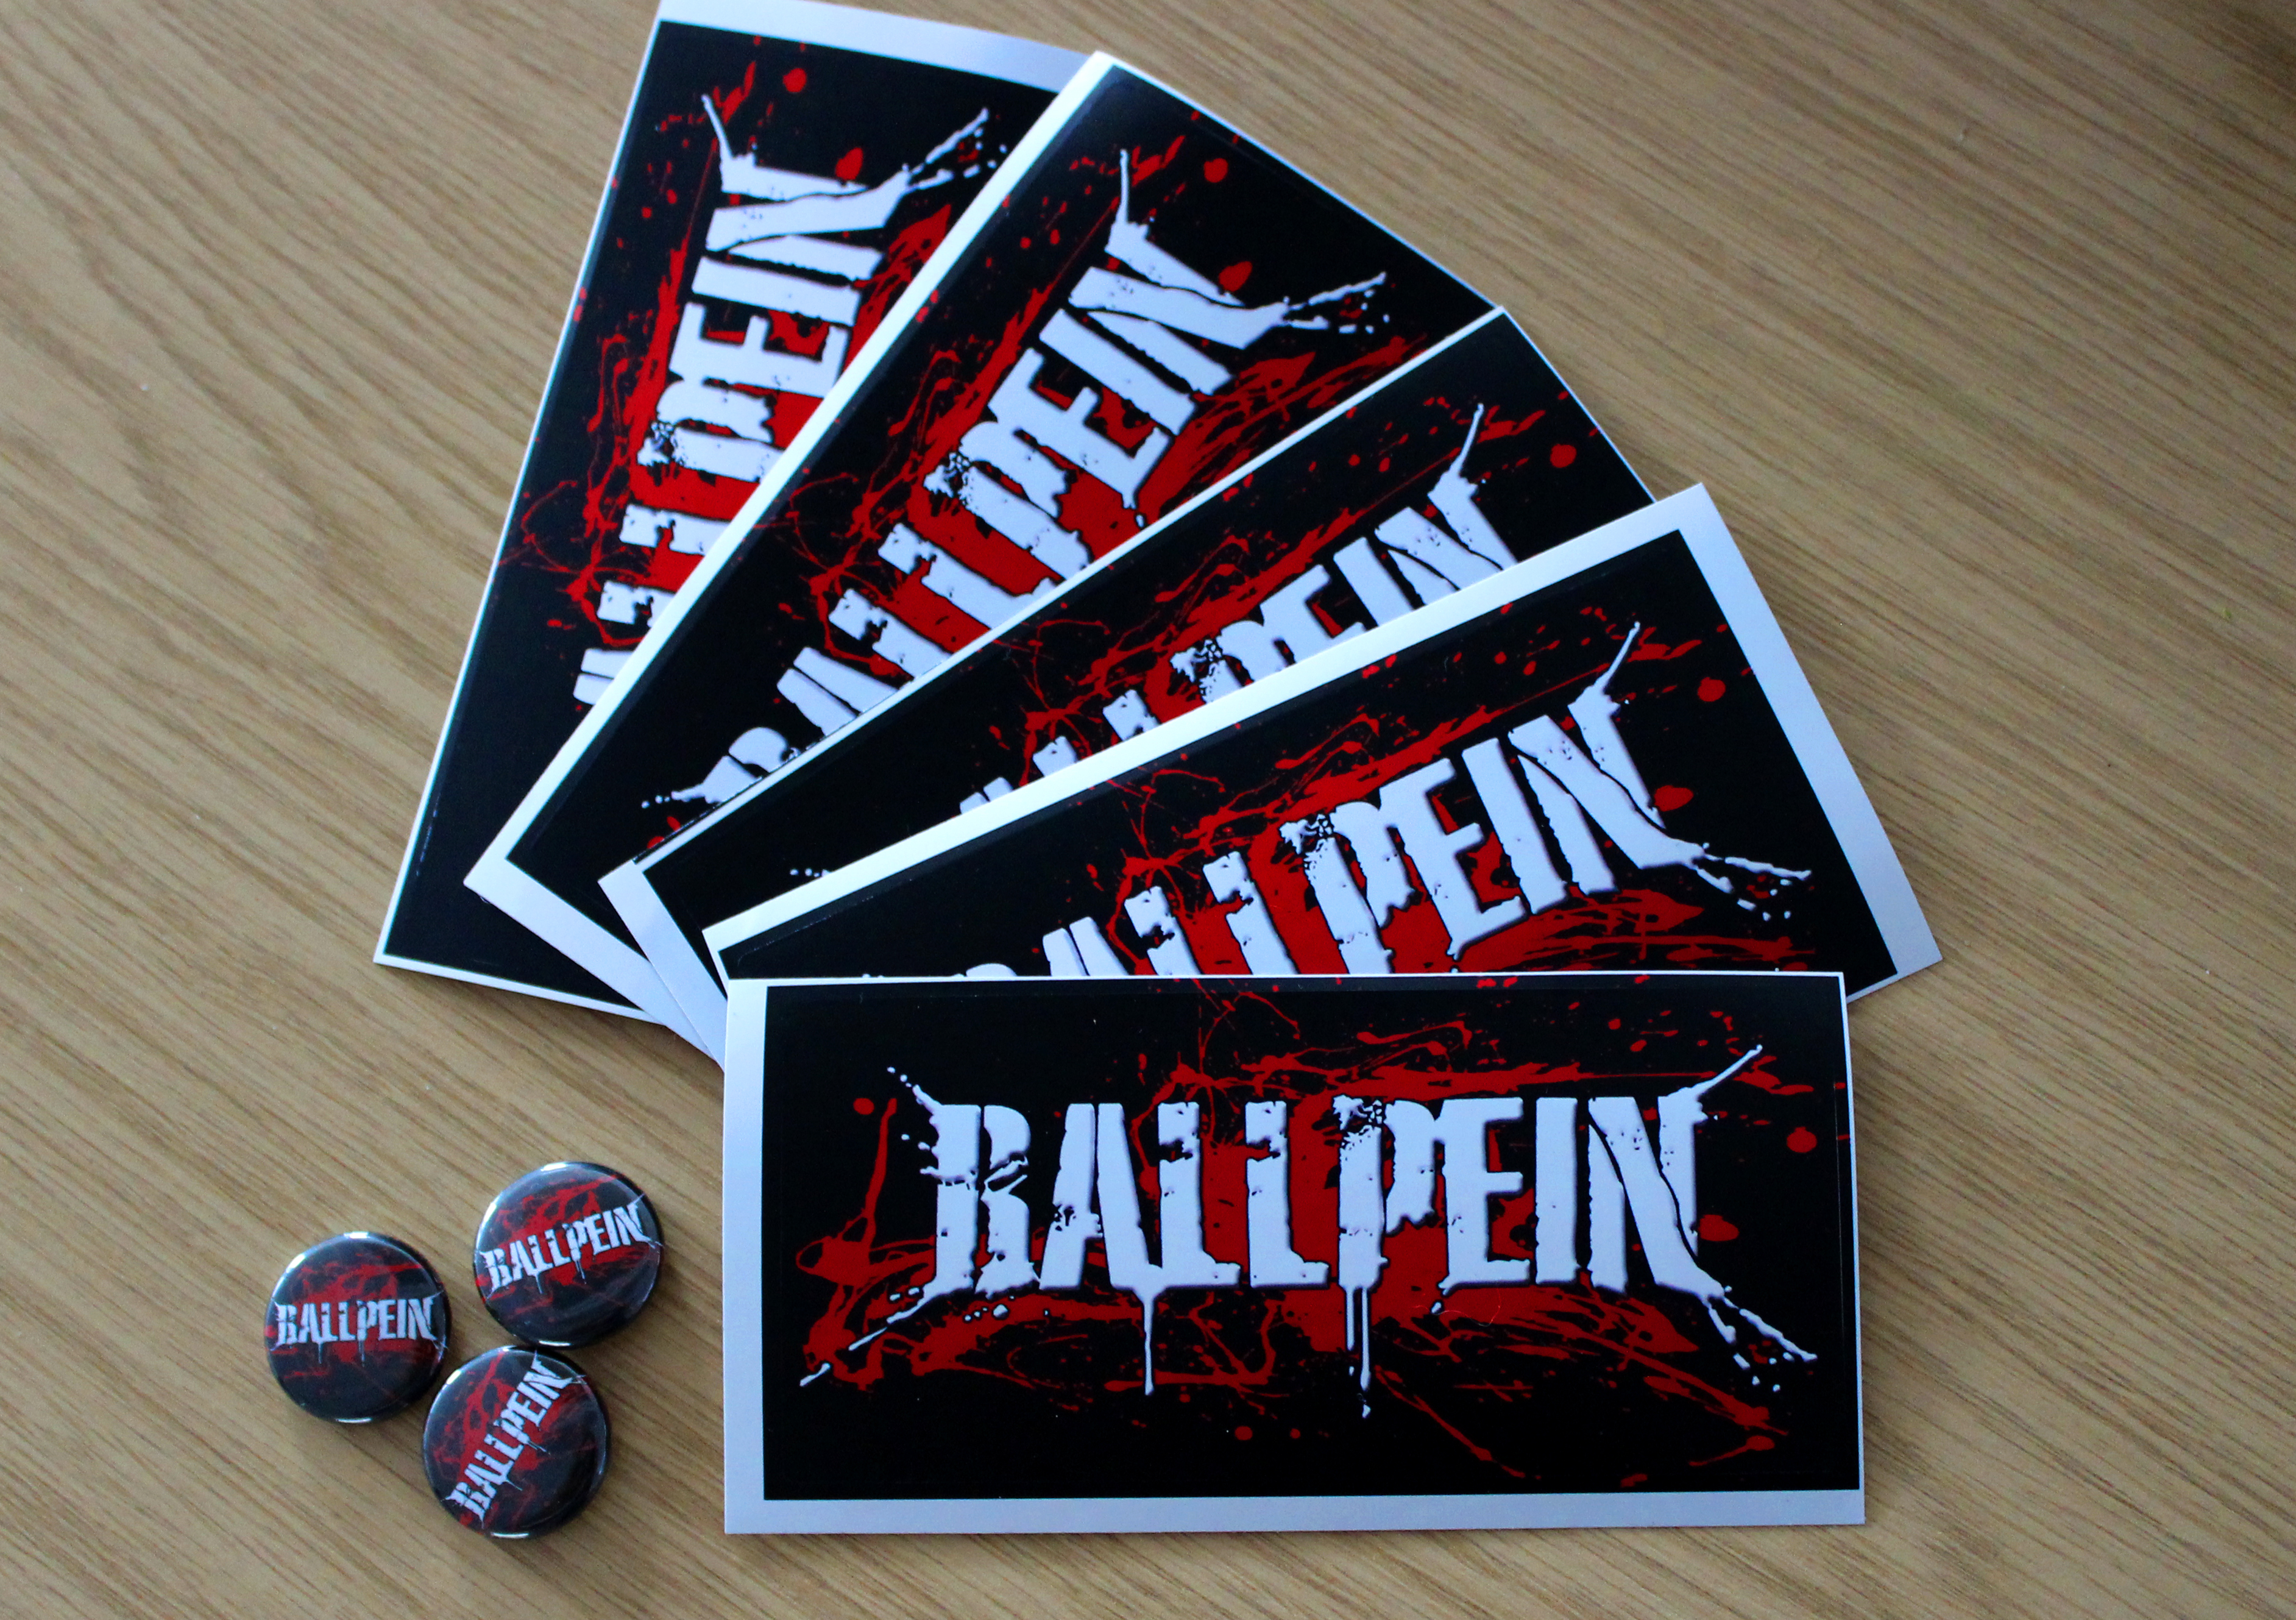 BALLPEIN badges and stickers